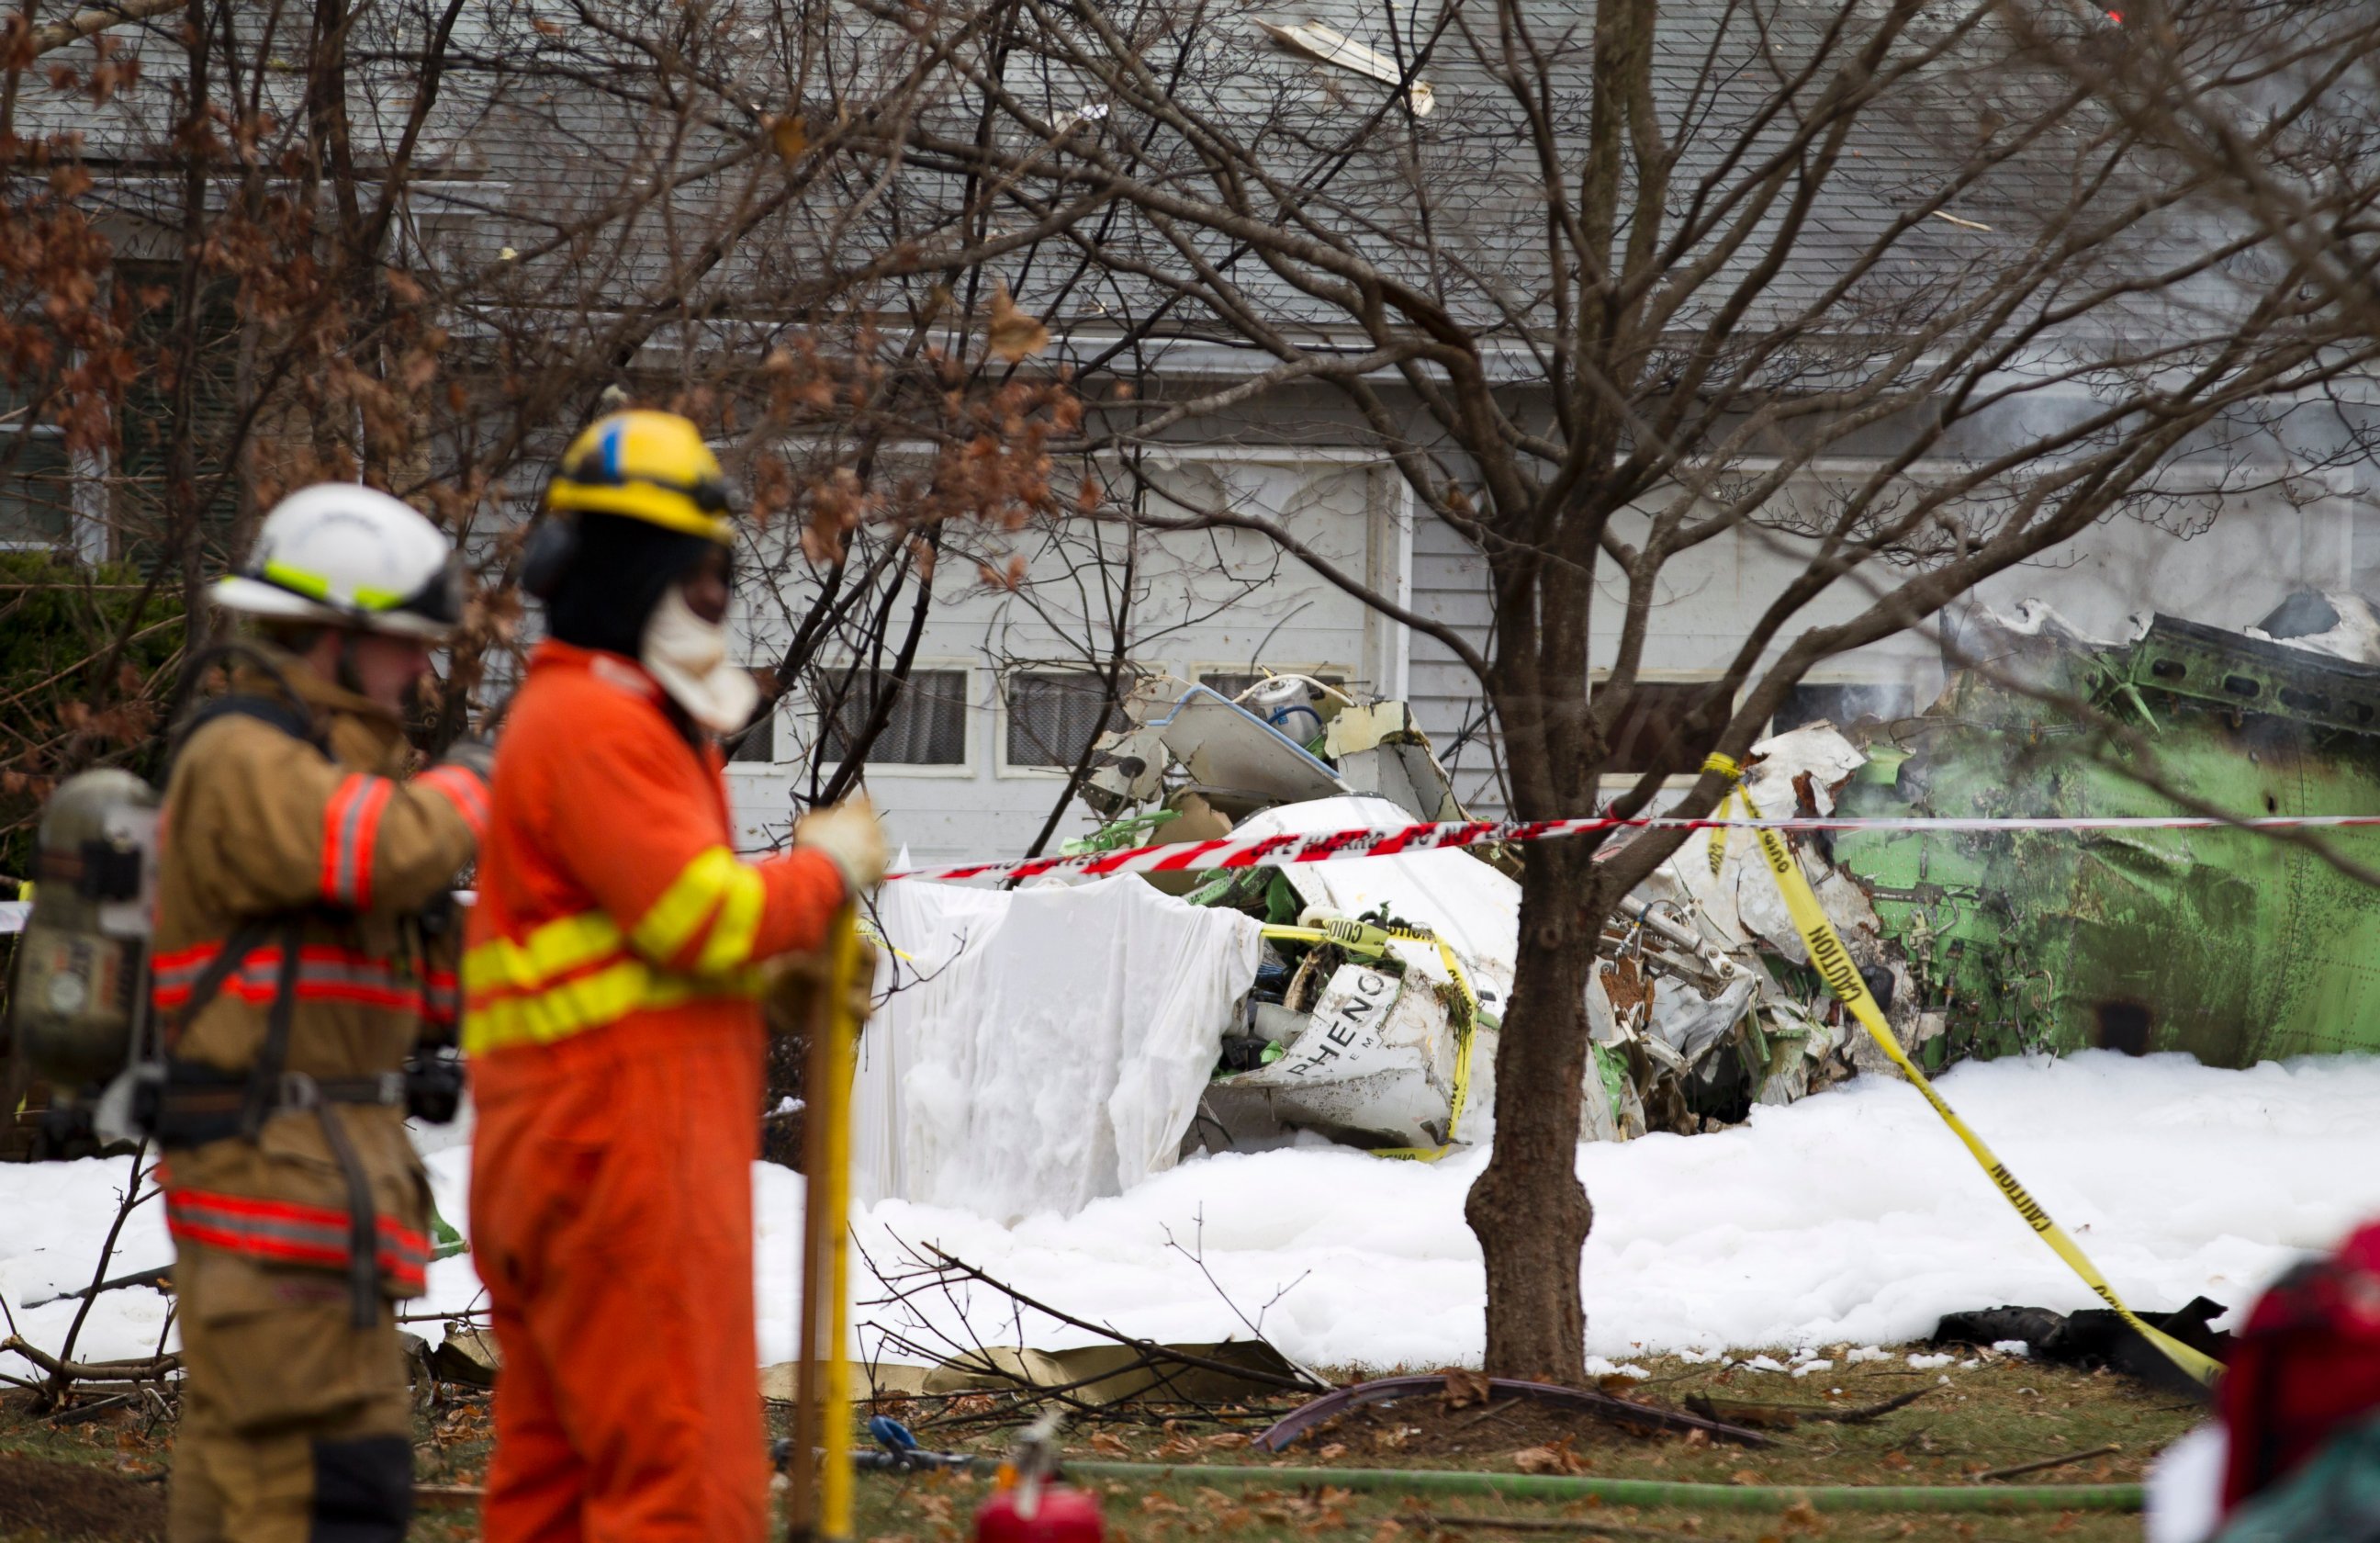 PHOTO: The wreckage of a small private jet sits in a driveway after crashing into a neighboring house in Gaithersburg, Md. on Dec. 8, 2014.